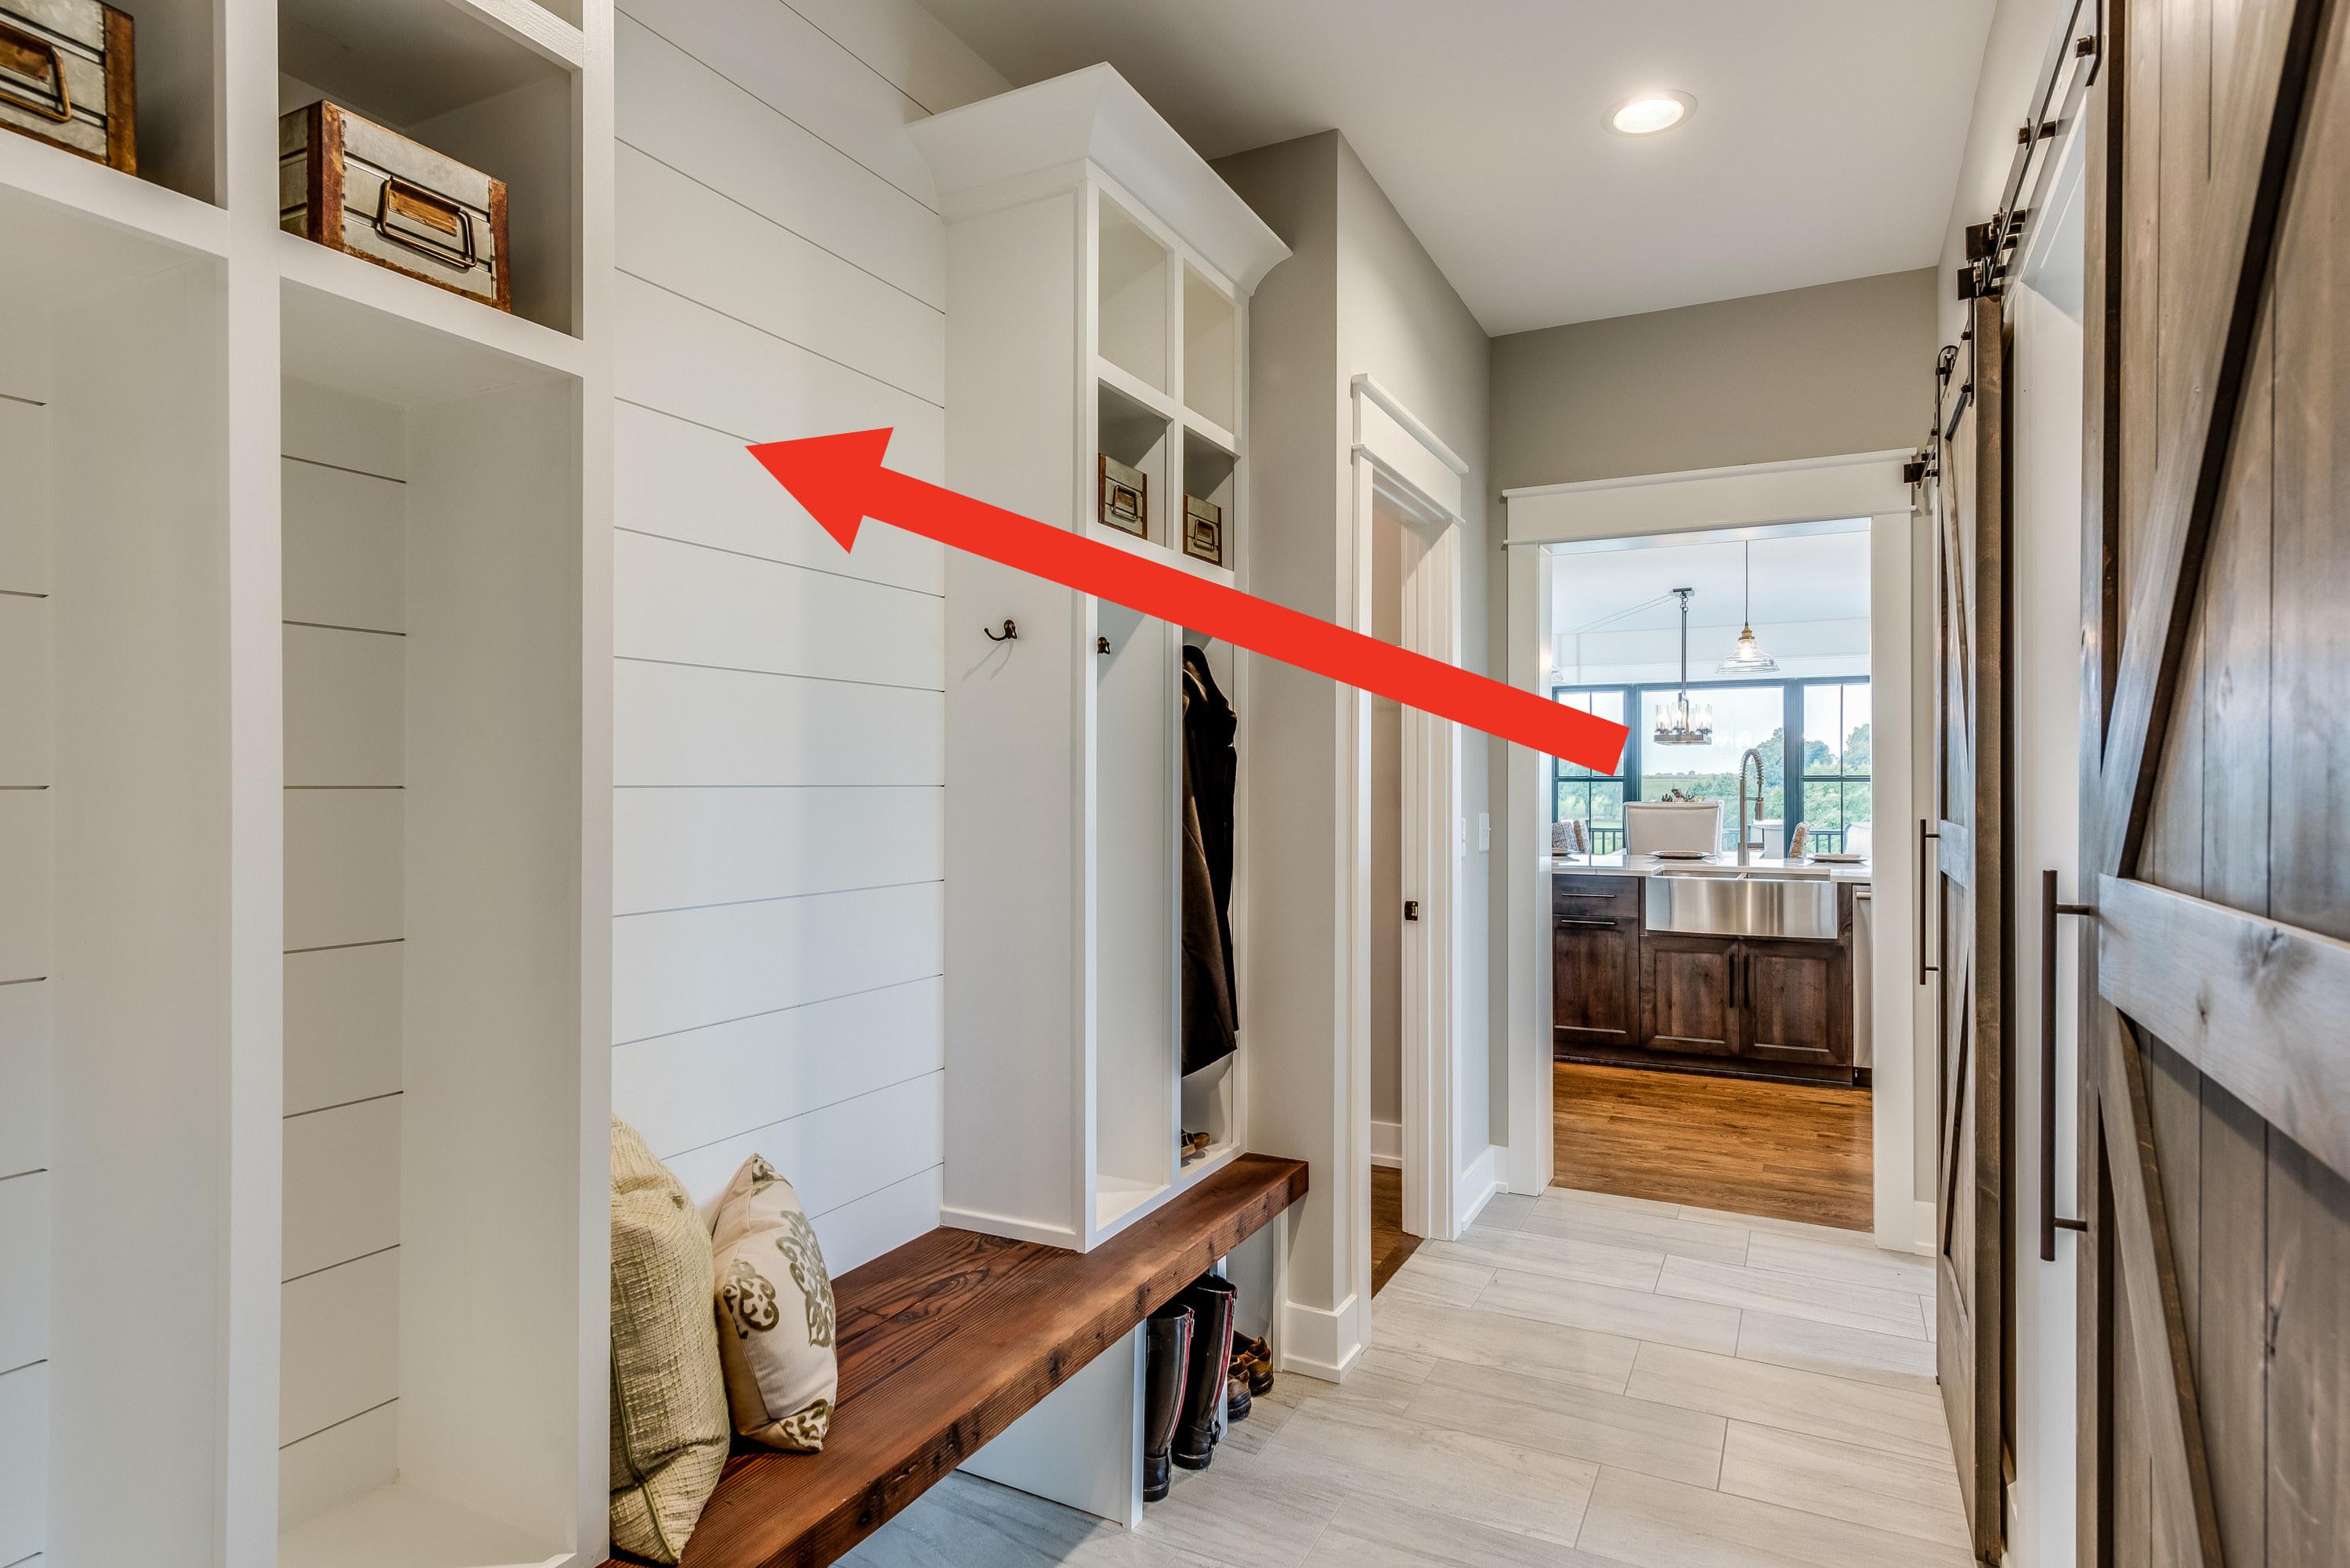 Arrow pointing to white shiplap walls in a hallway